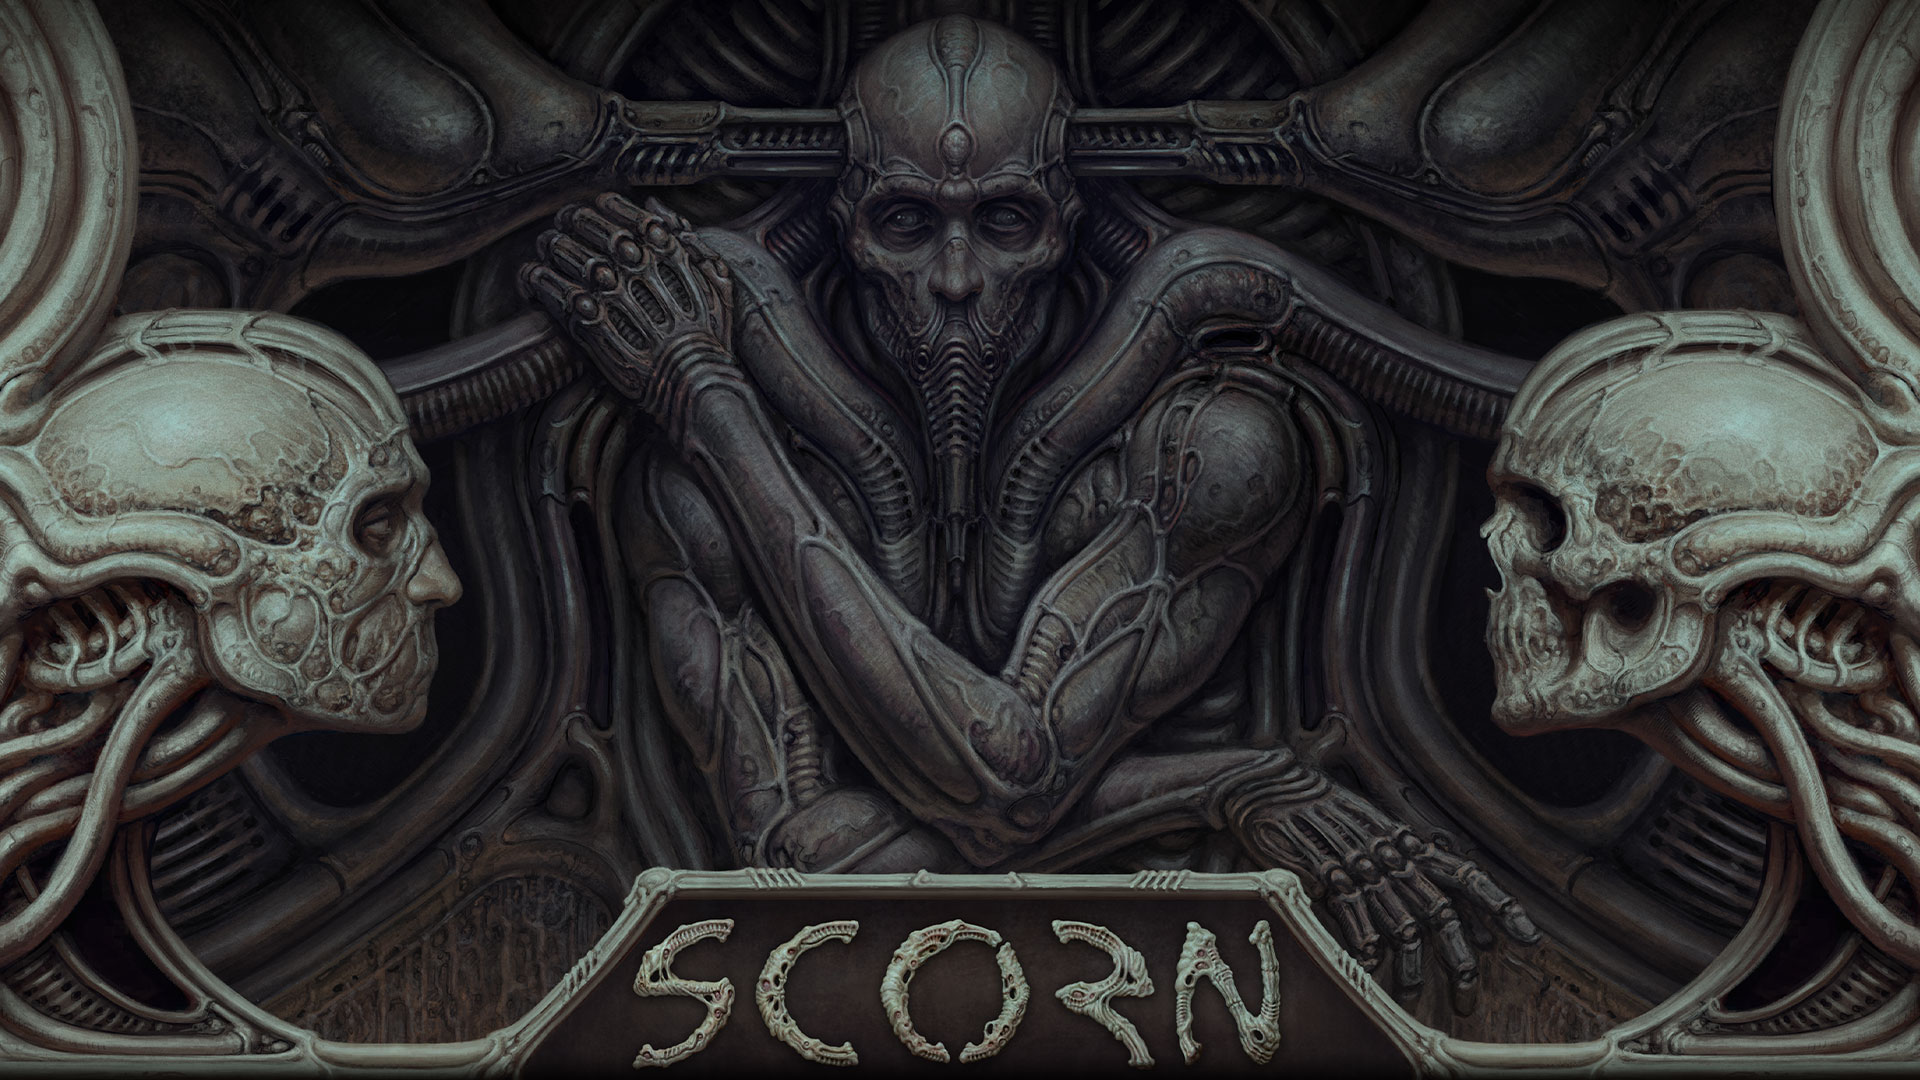 Scorn will take you 6 to 8 hours to complete, and other details about the game